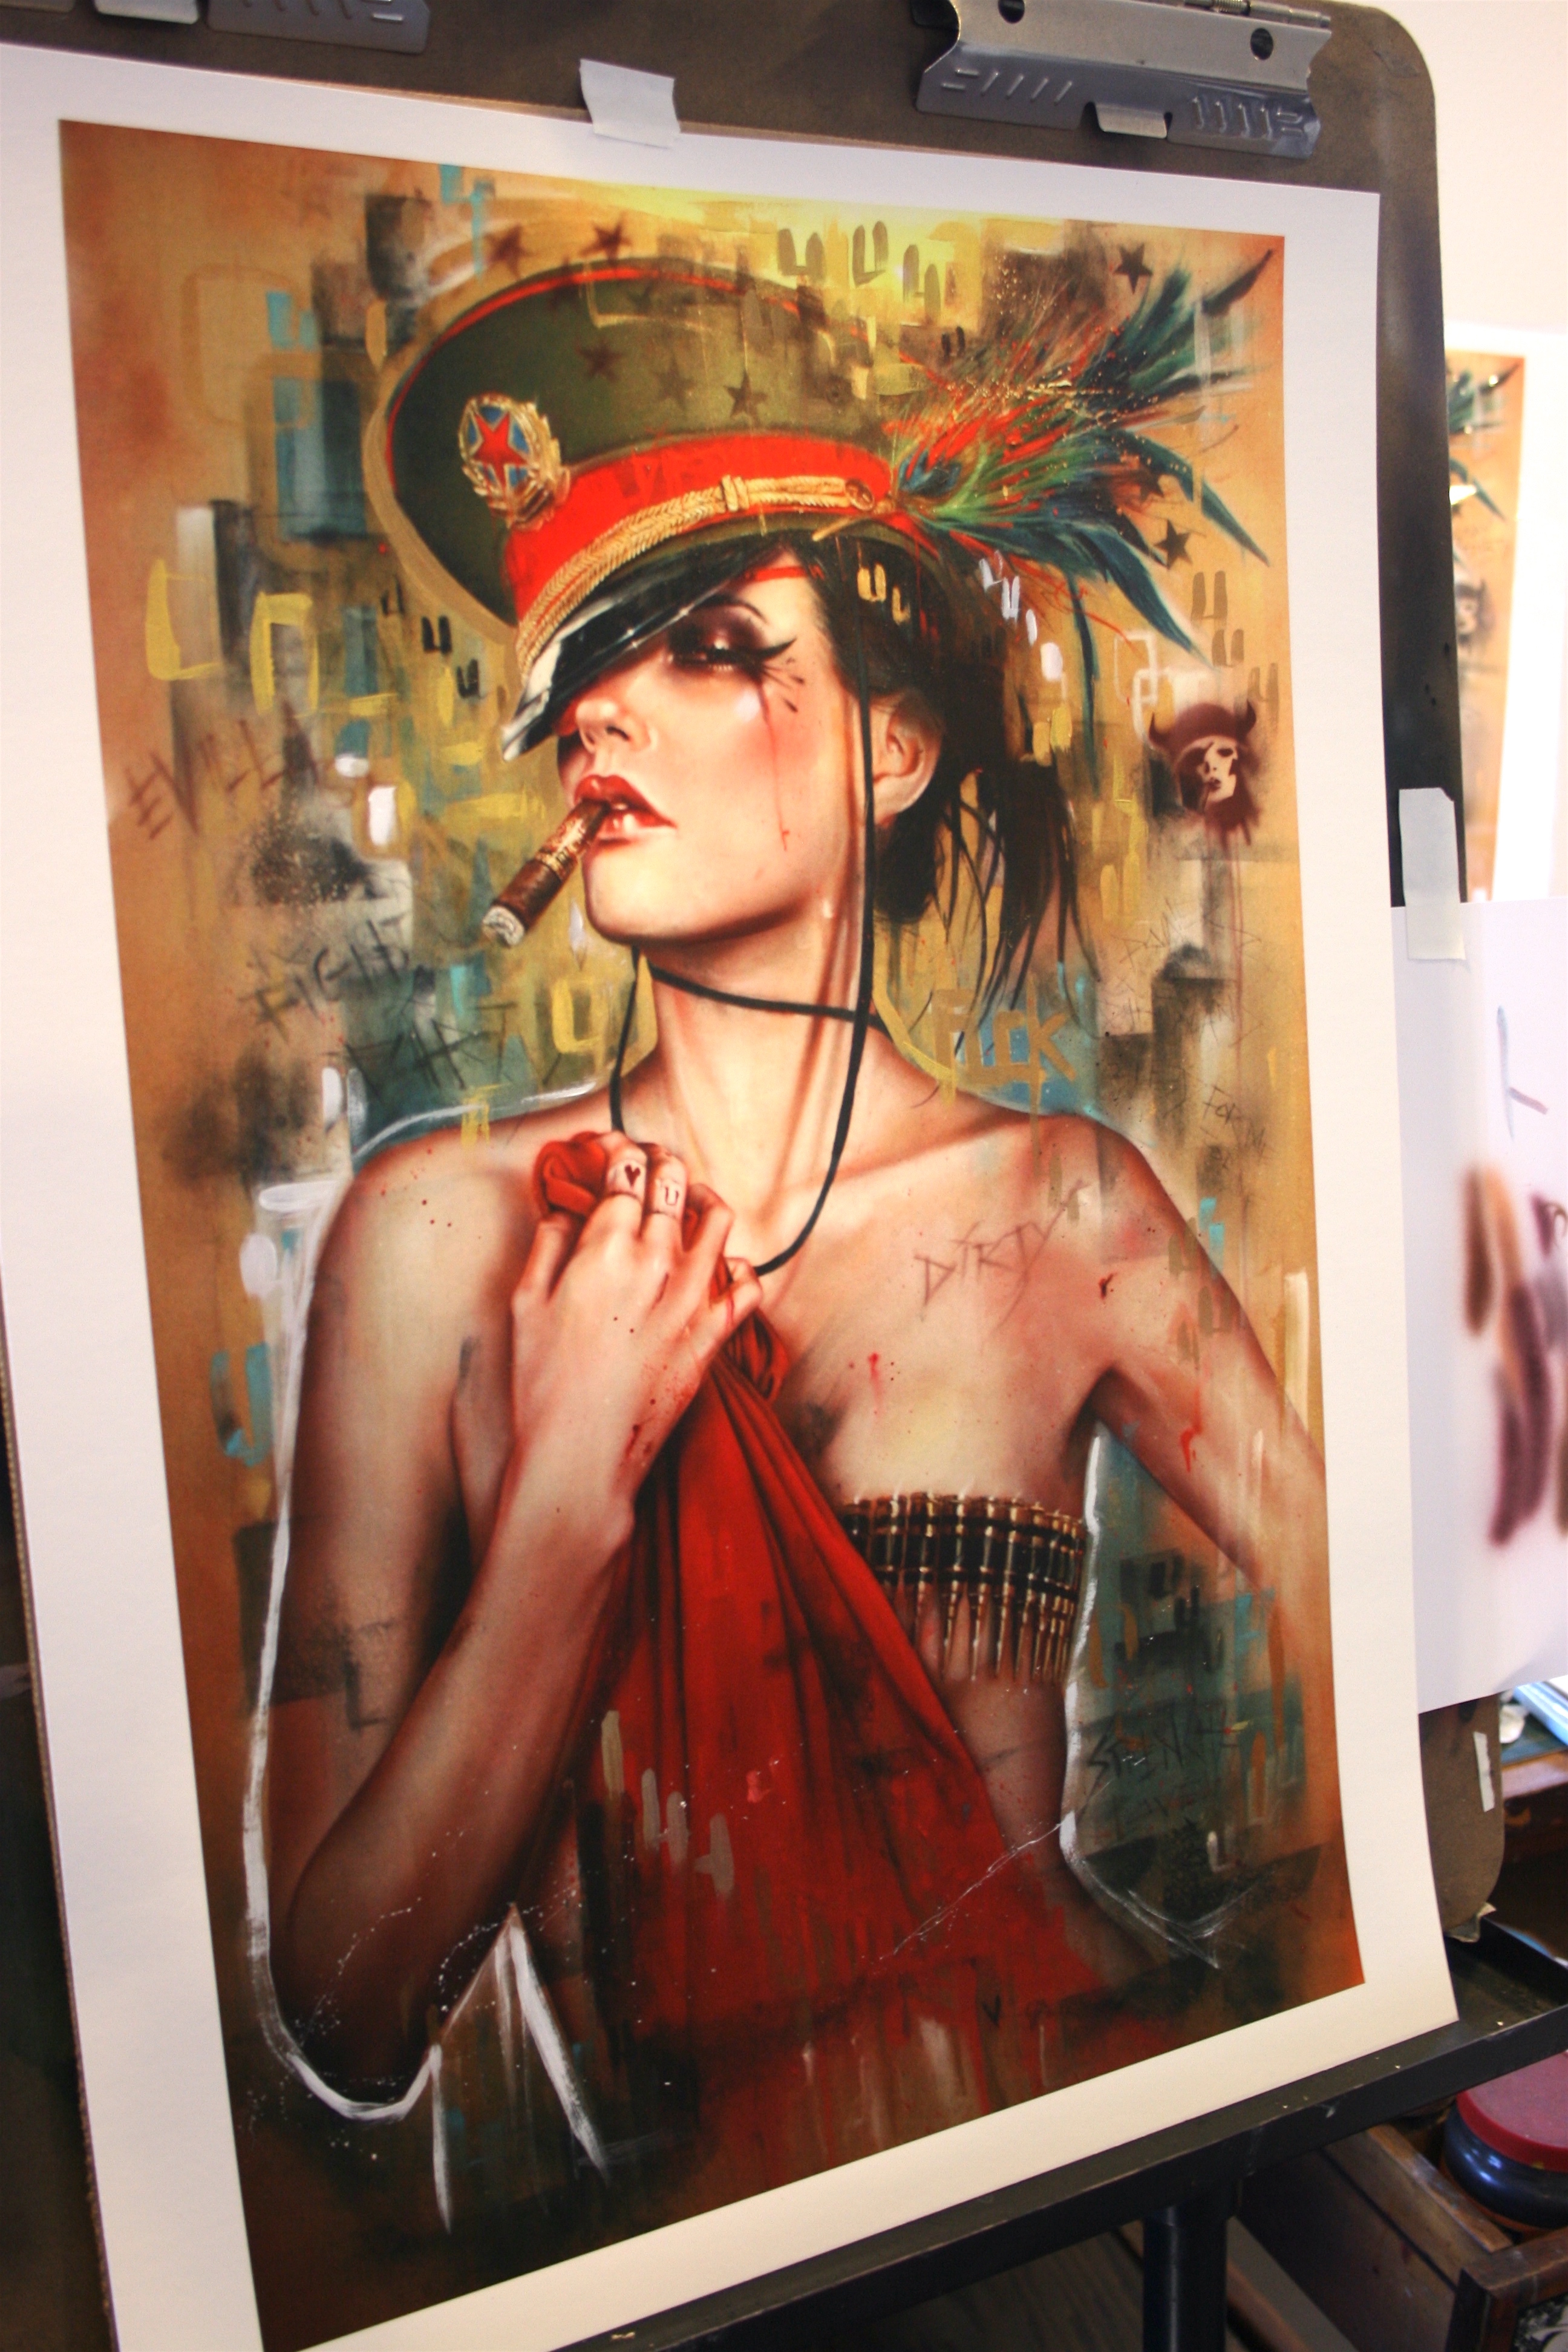 "Fearless" by Brian Viveros.  18" x 24" Giclee, hand-embellished.  Framed to 24" x 30".  Ed of 33 S/N.  $600